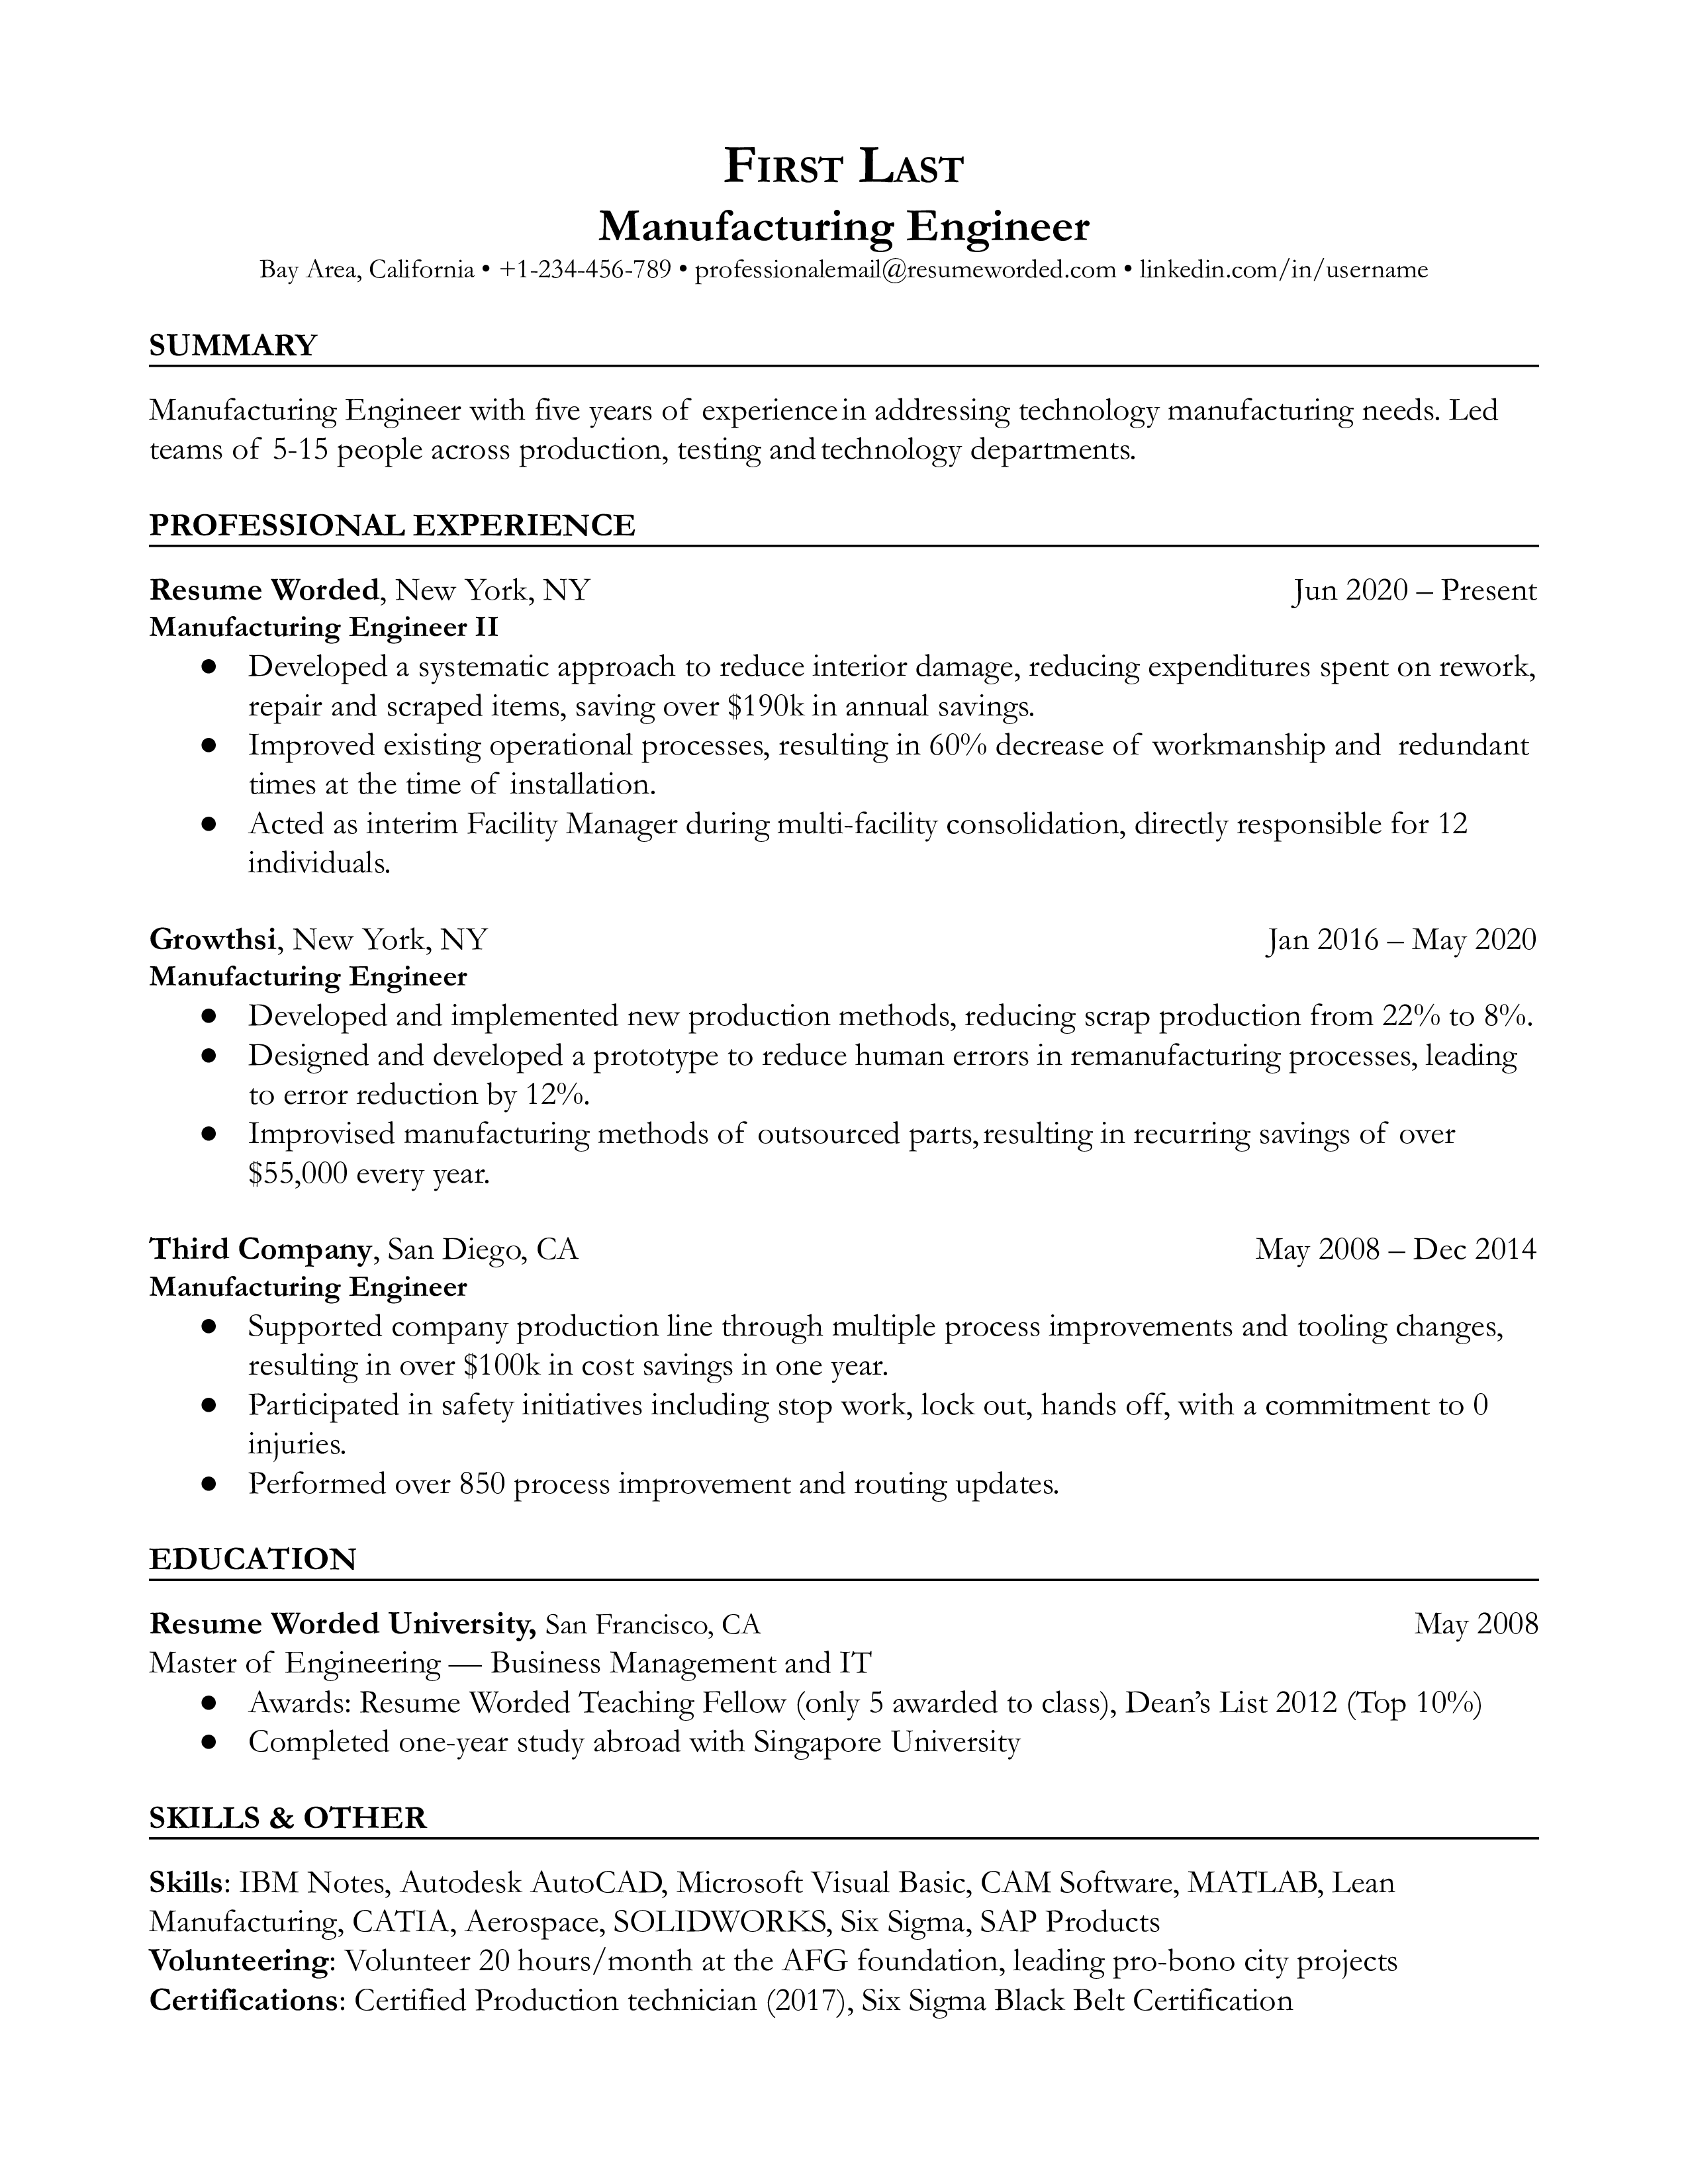 Manufacturing engineer resume showcasing technical skills and project results.